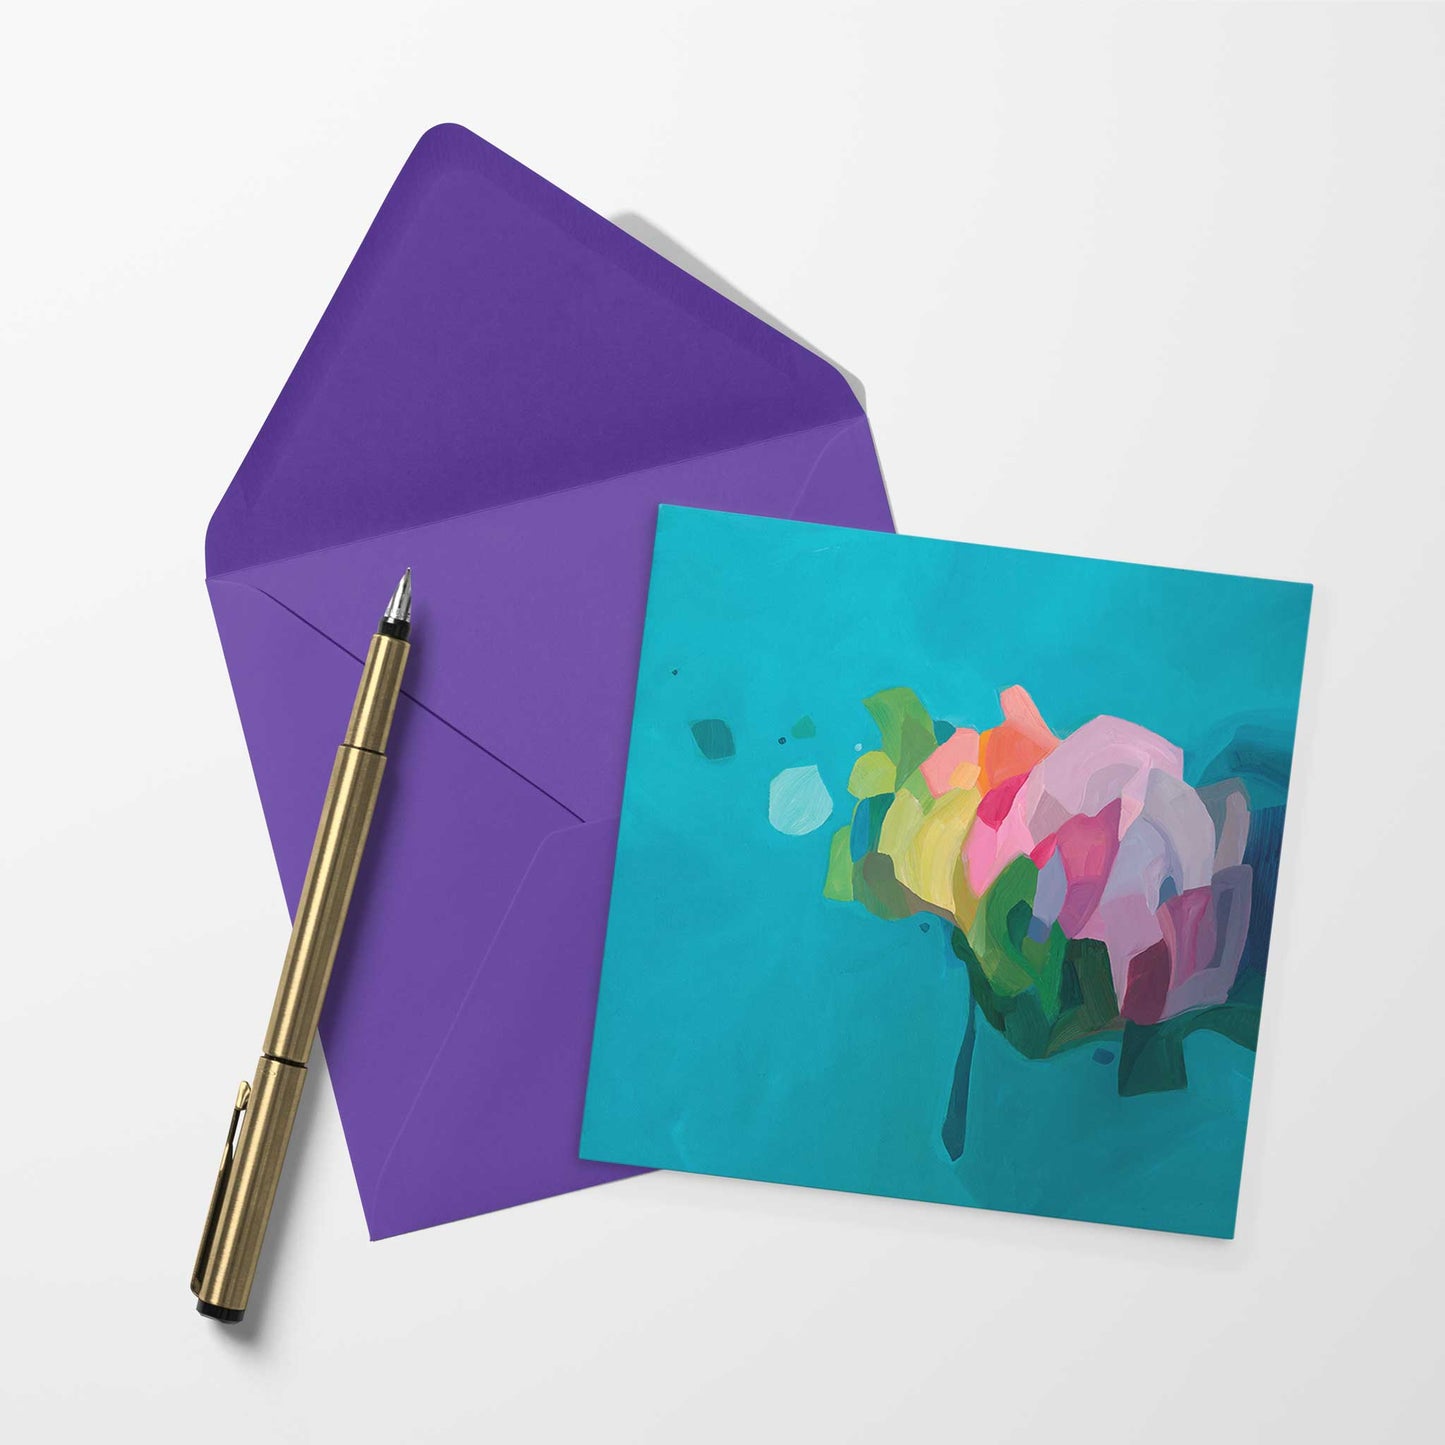 artist greeting card with turquoise abstract artwork and contrasting purple envelope